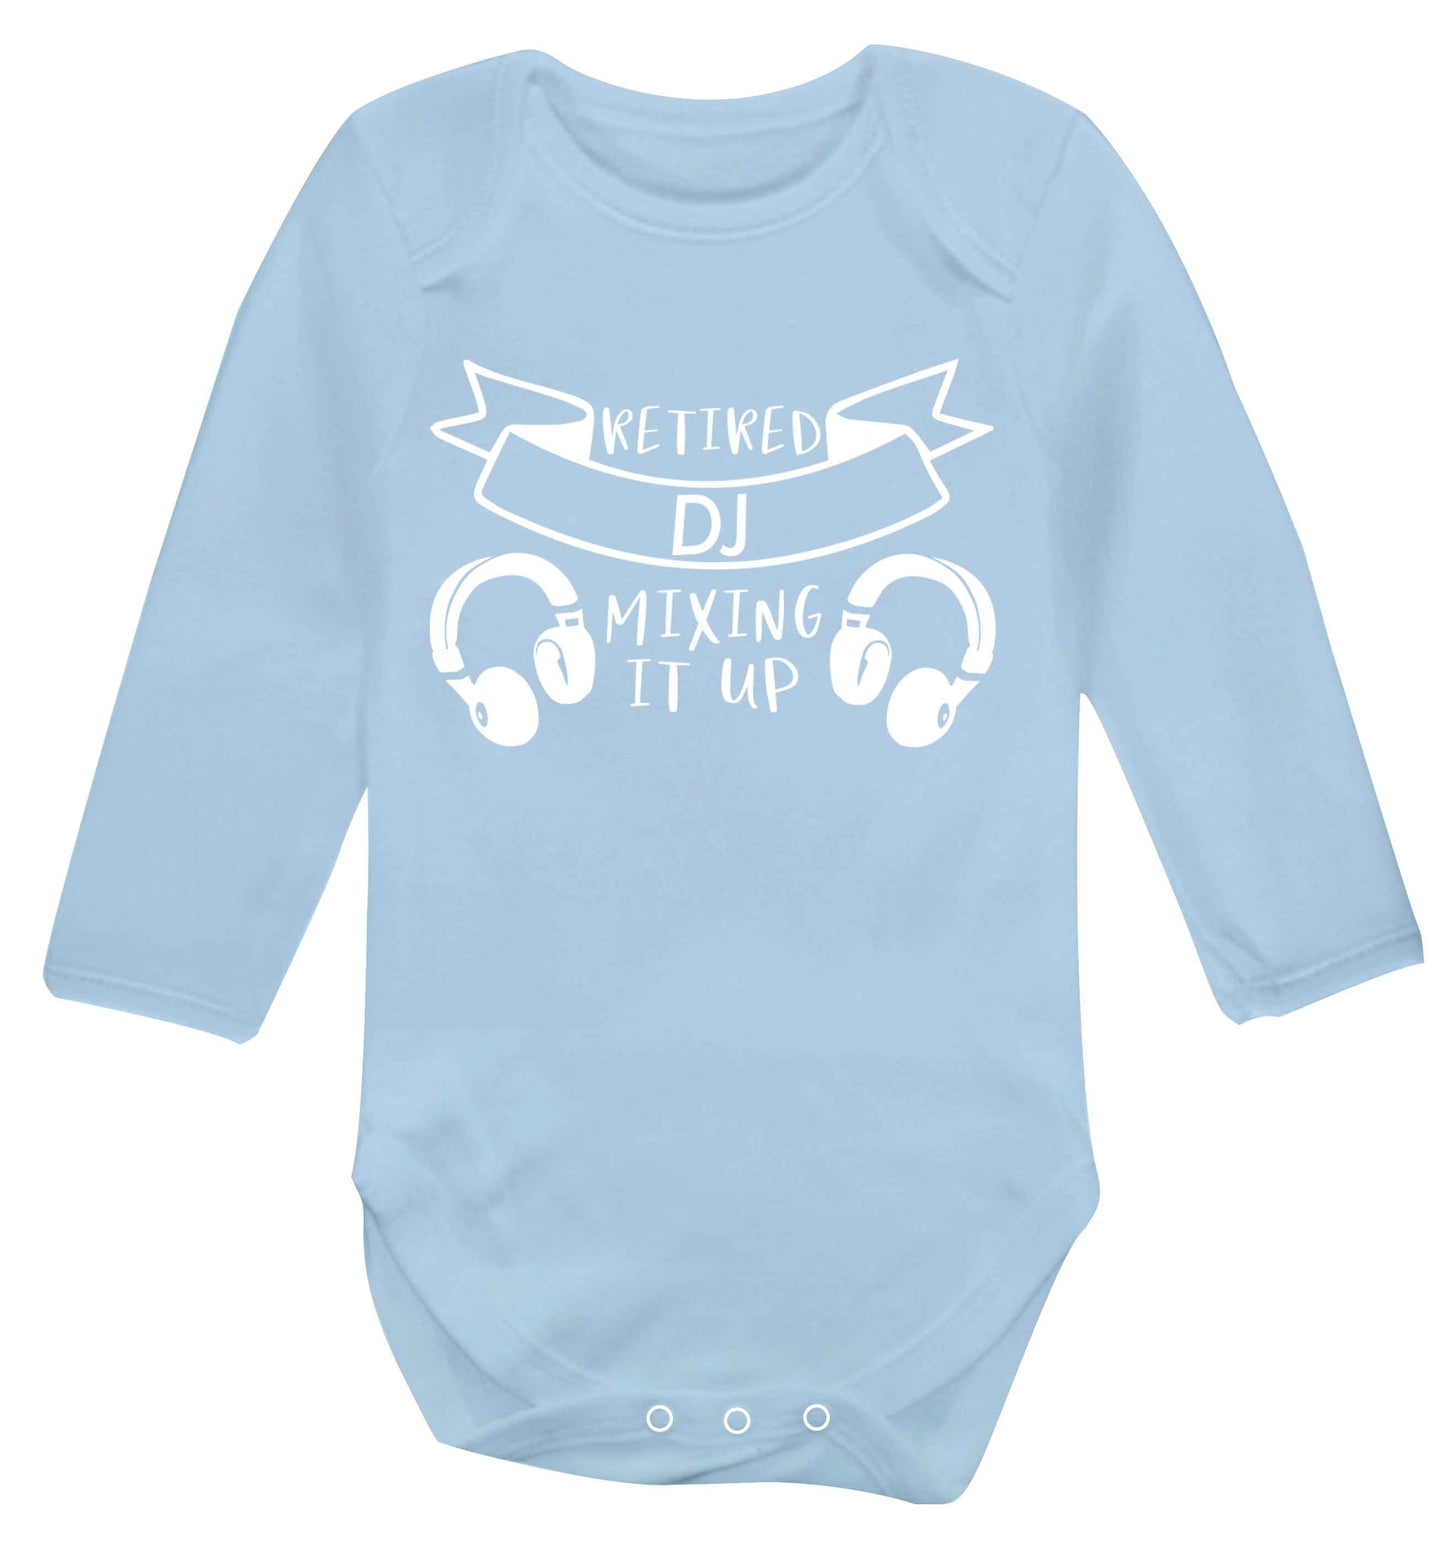 Retired DJ mixing it up Baby Vest long sleeved pale blue 6-12 months